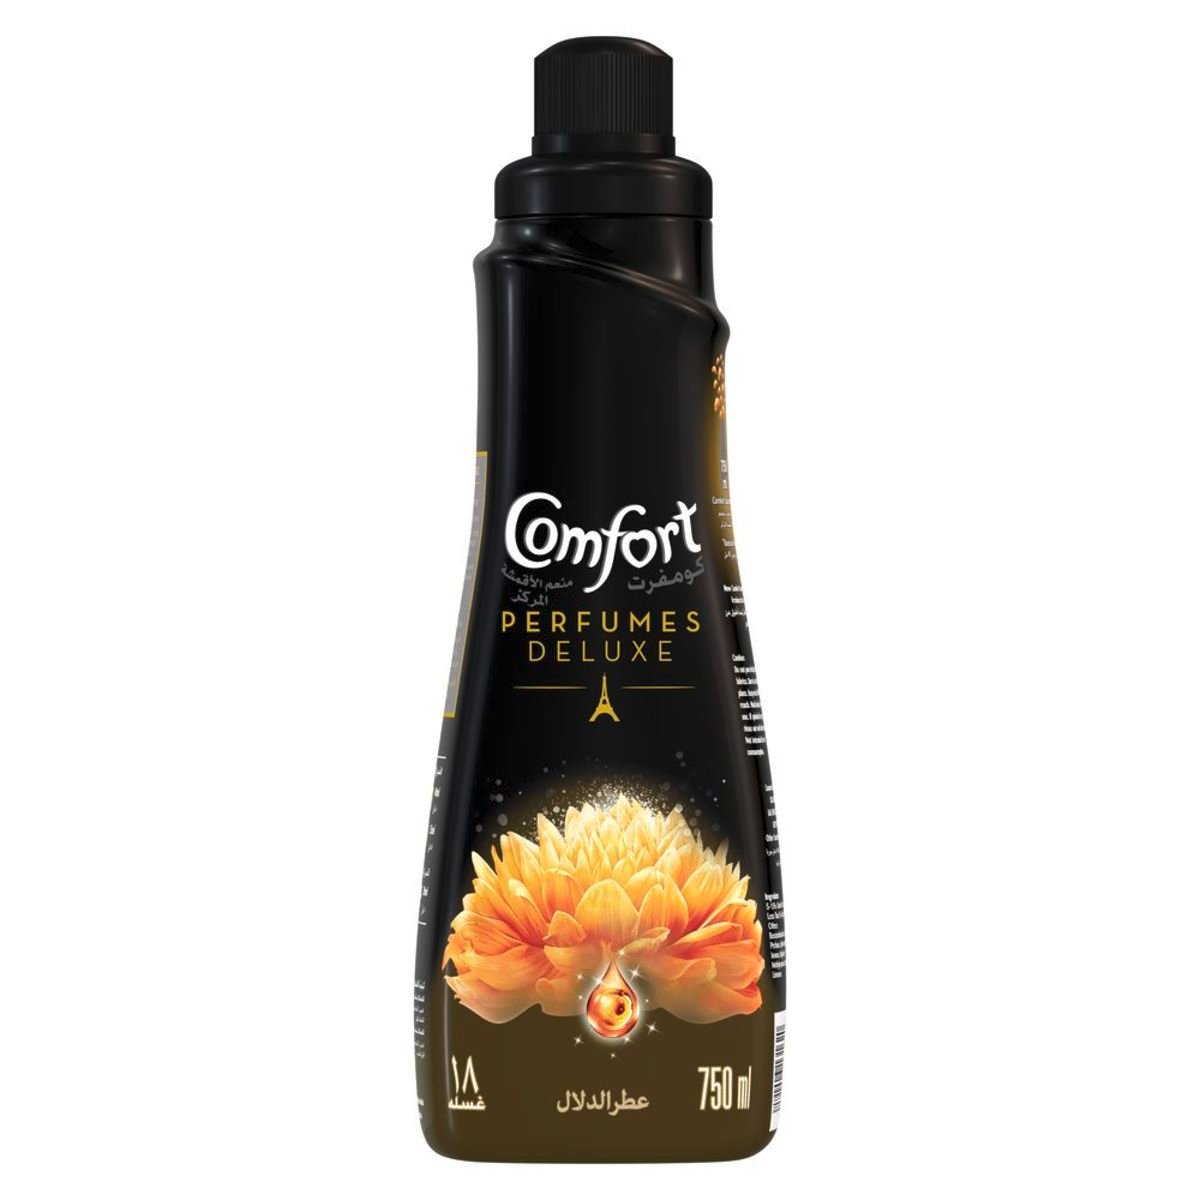 Comfort Perfumes Deluxe Concentrated Fabric Softener Indulgence 750ml